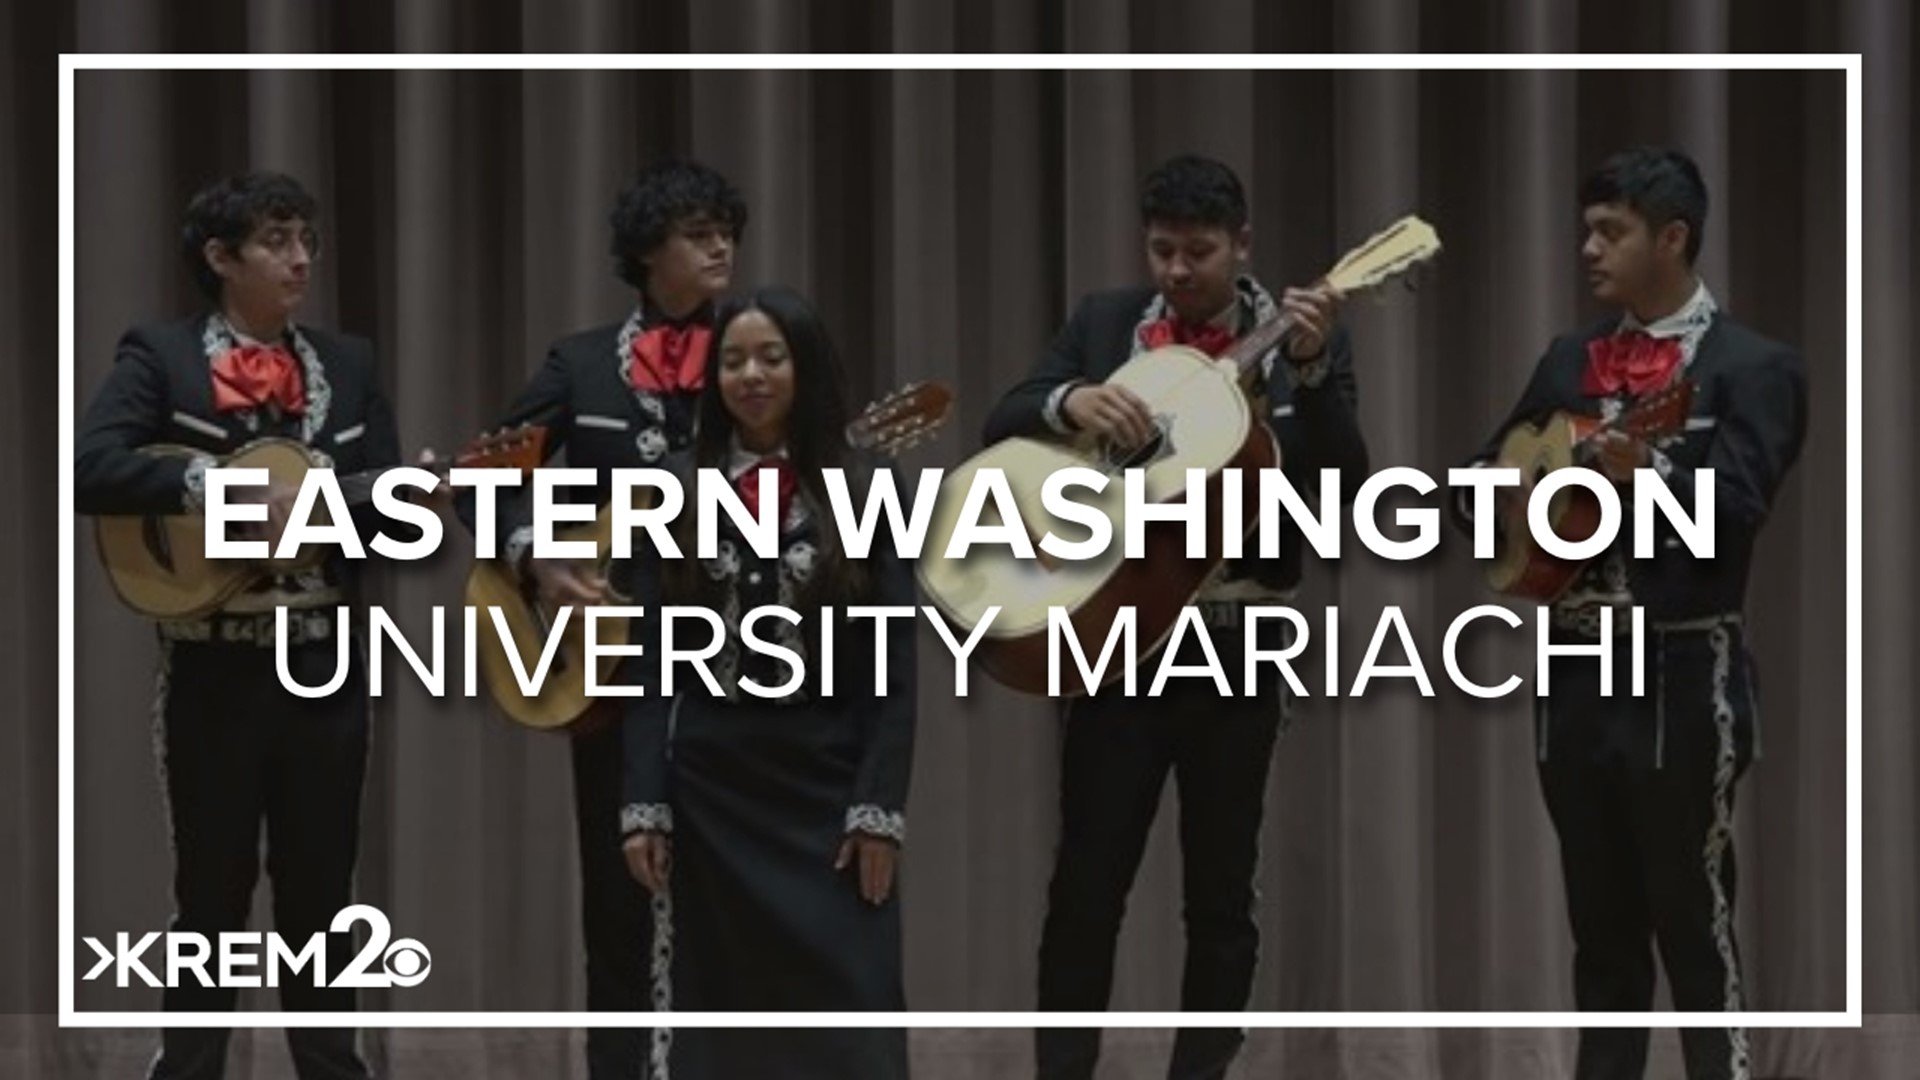 Eastern Washington University's music hall is home to one of only a few mariachi bands in the region and gives Hispanic students a chance to showcase their heritage.